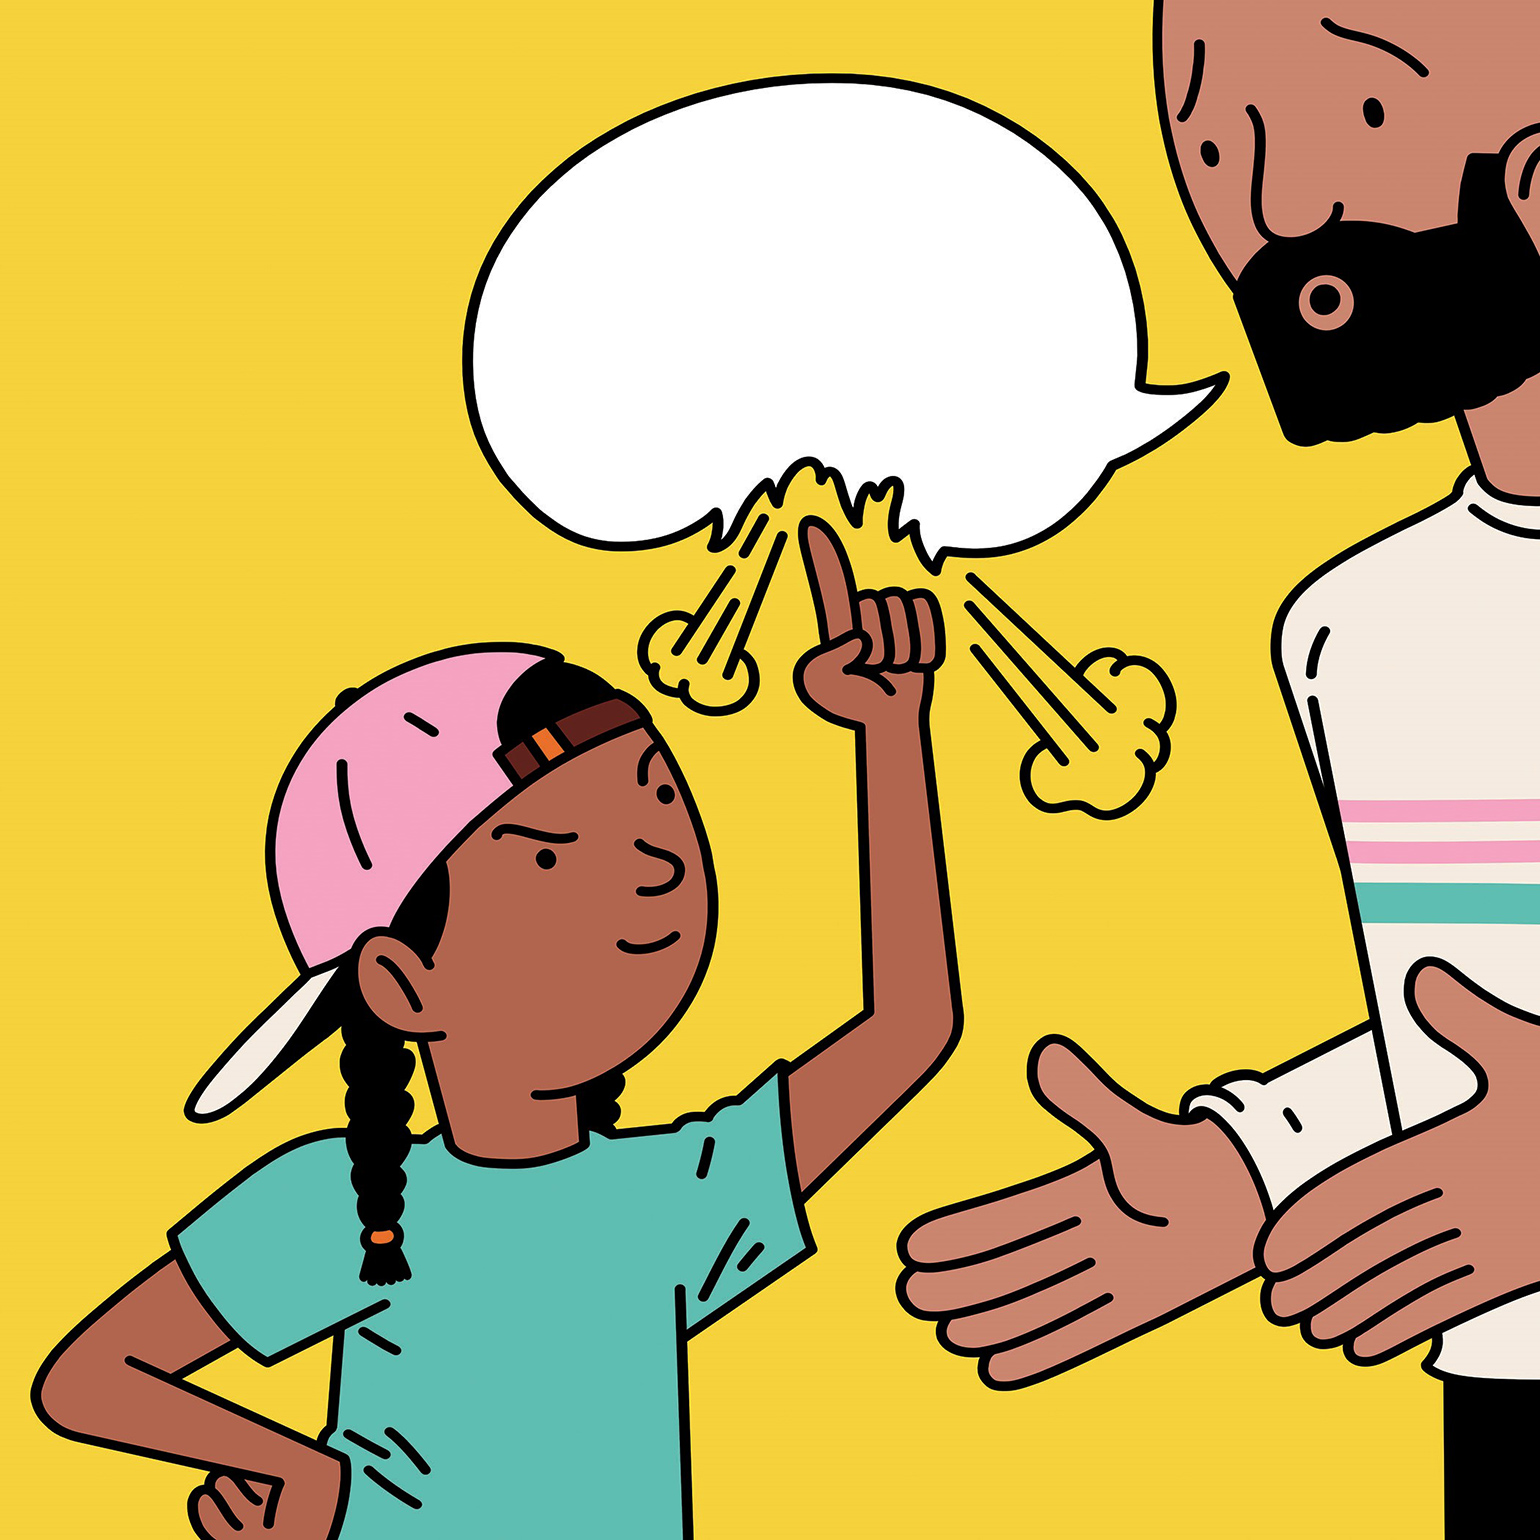 Illustration of a child popping her father's speech bubble